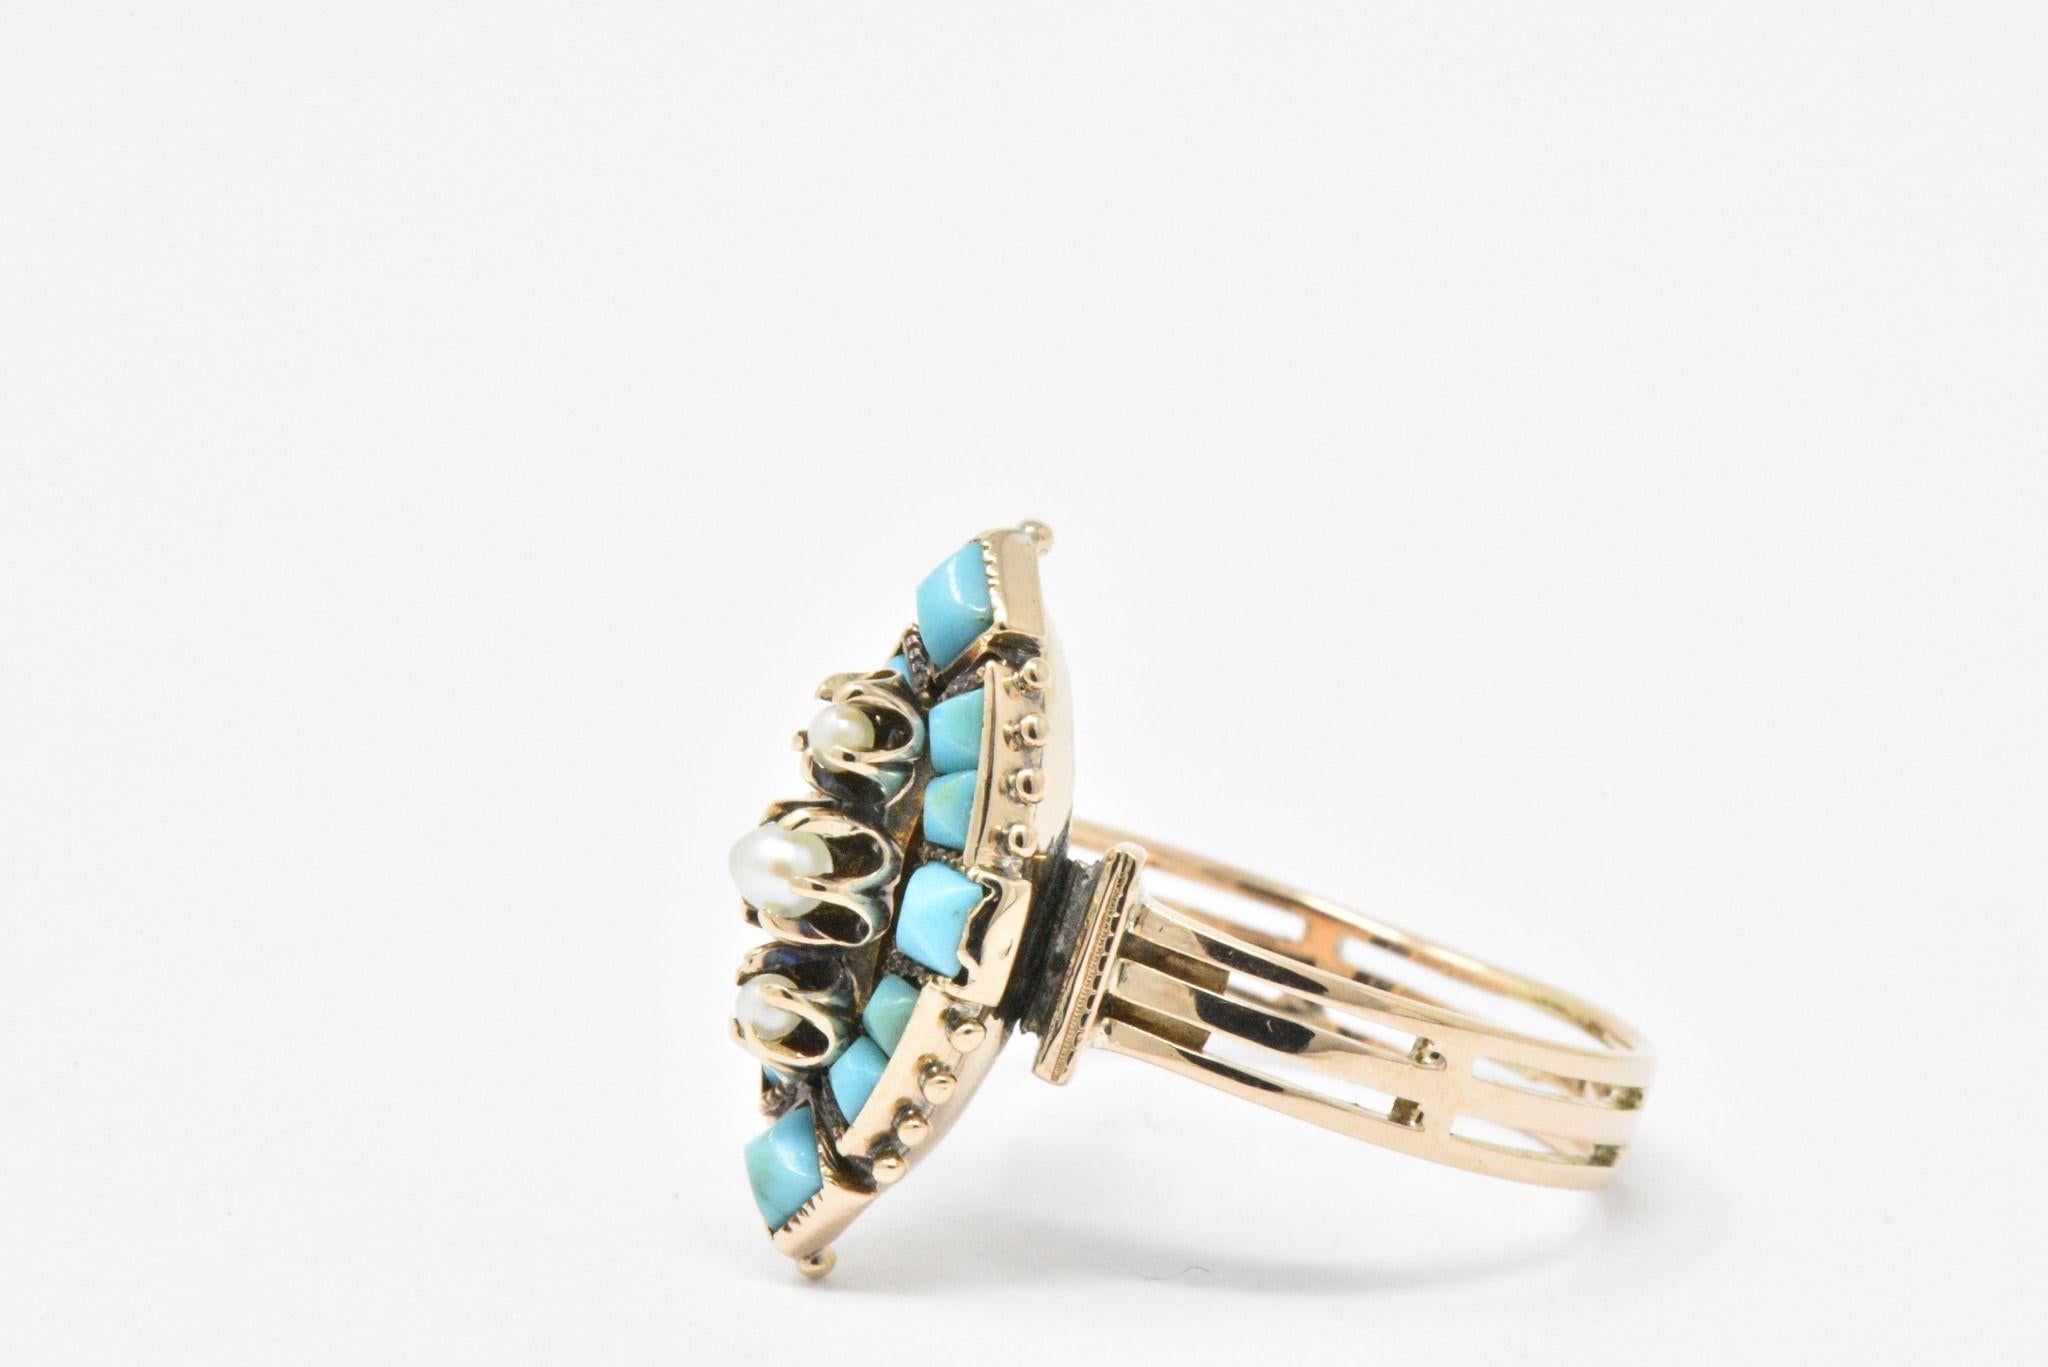 Navette form set with calibre cut turquoise and centering three seed pearls

Delightful gold beading detail and pierced shank make this a very unique ring

Ring Size: 5 1/2

The top of the ring measures 18.2 mm wide and the ring sits 6.5 mm